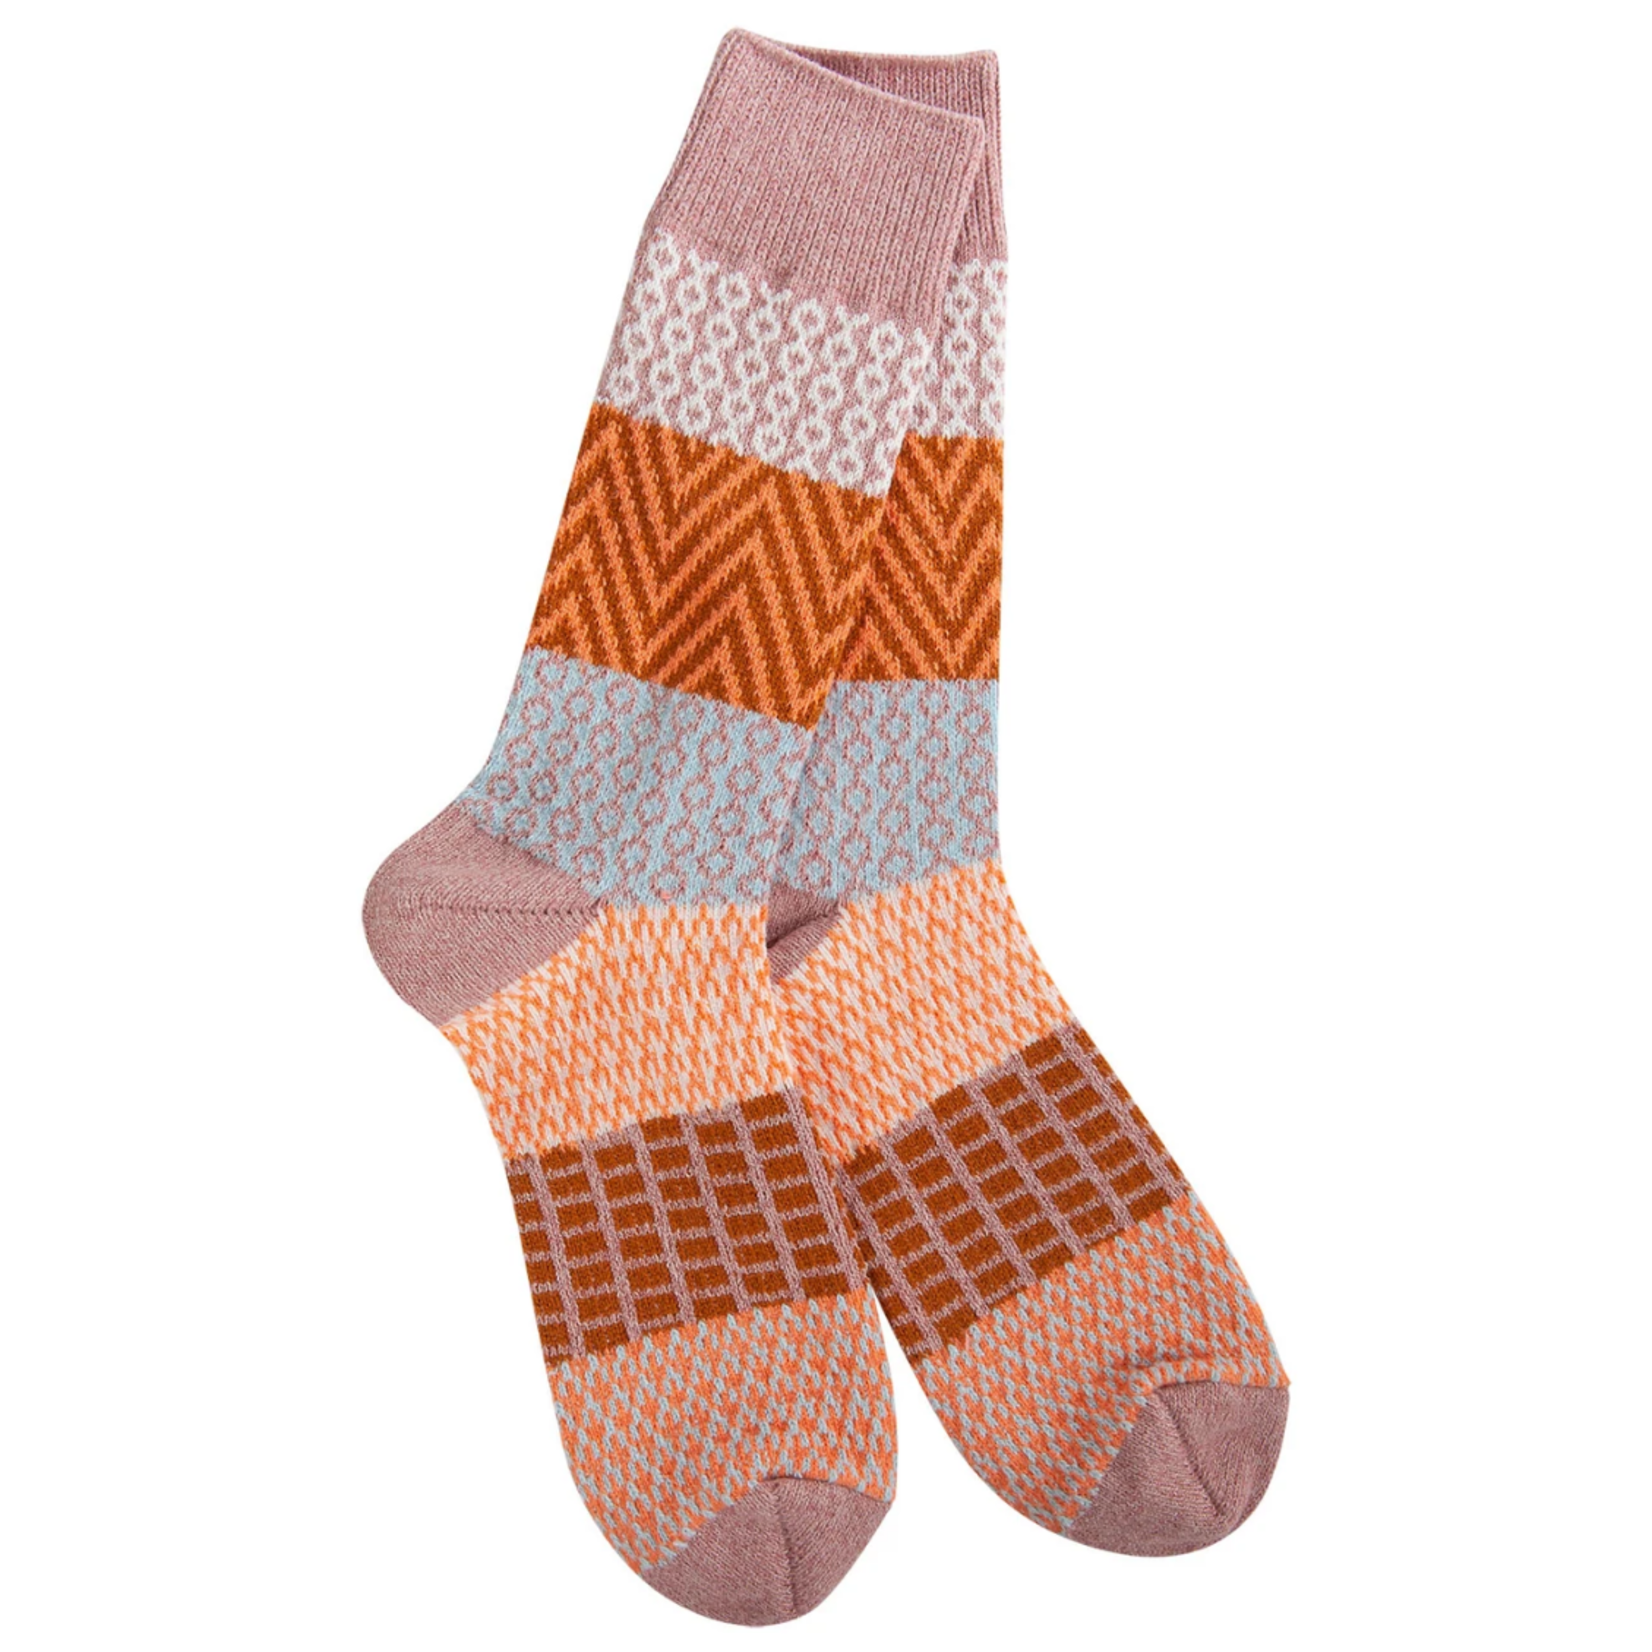 Crescent Sock Company Socks: Weekend Collection